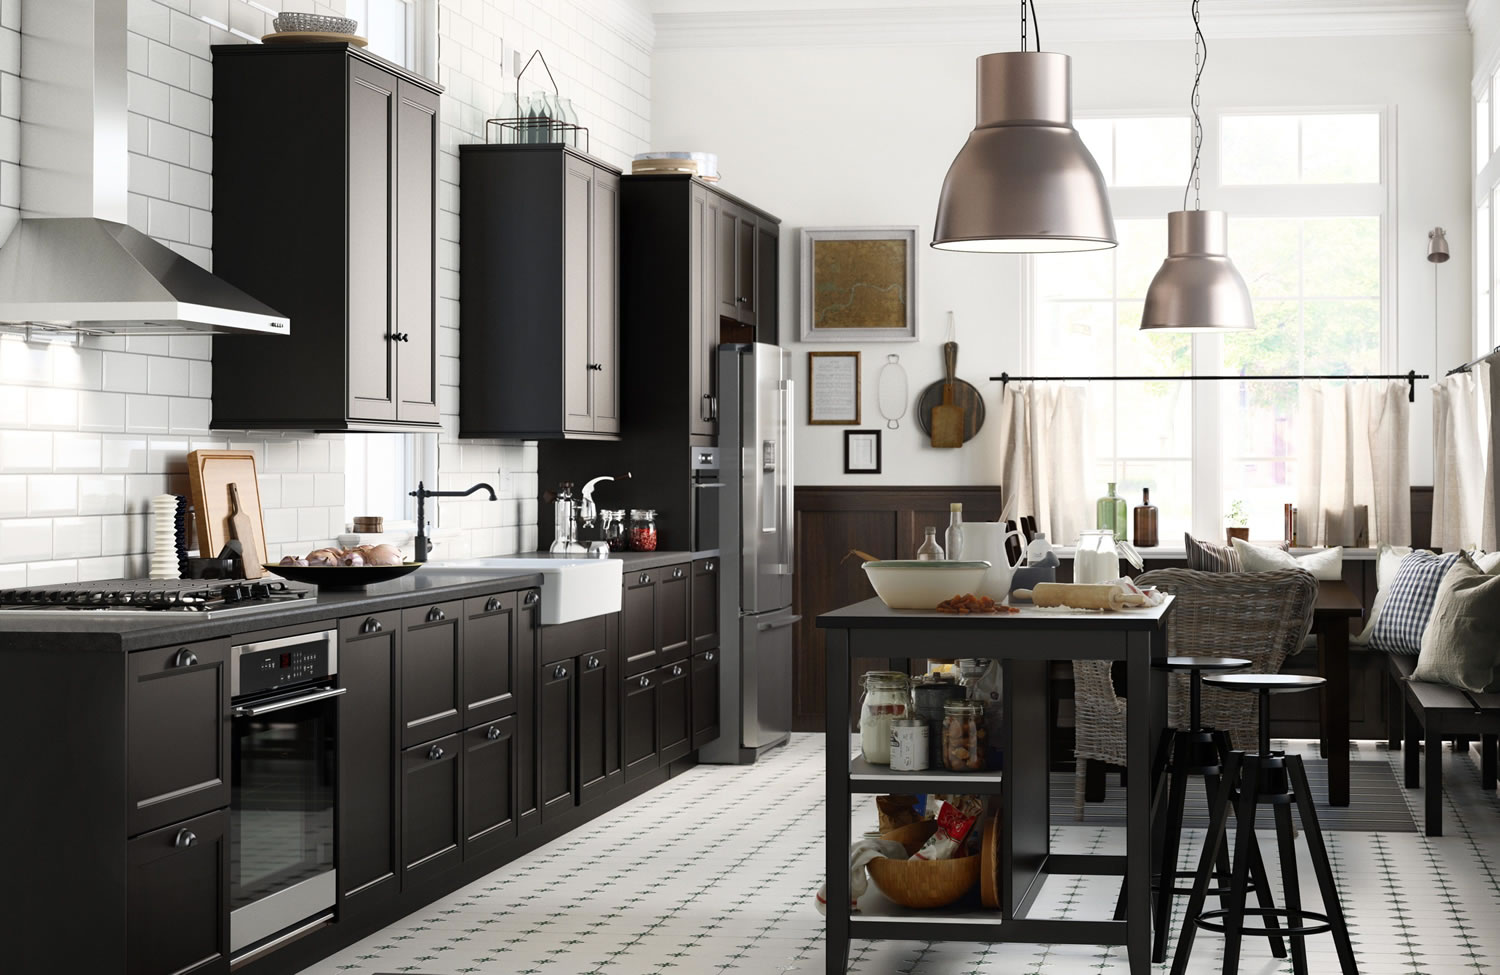 Above: The Laxarby cabinet door has a distinctly traditional look, in a warm black-brown hue. Pairing black with metallic elements, such as these big pendants lights, is trendy.